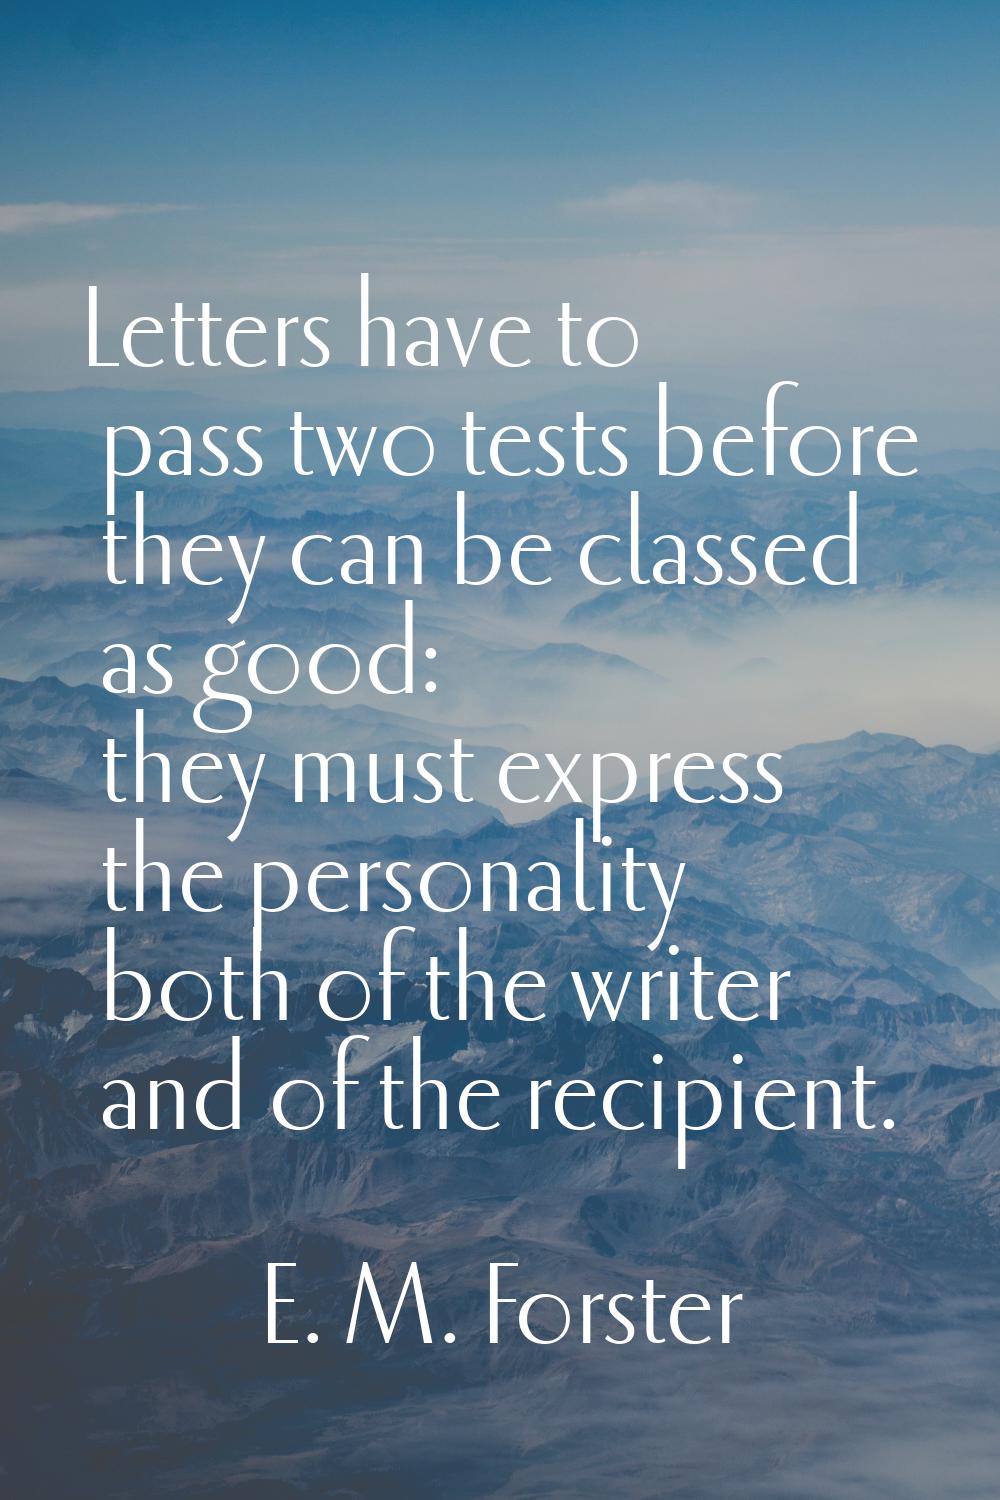 Letters have to pass two tests before they can be classed as good: they must express the personalit